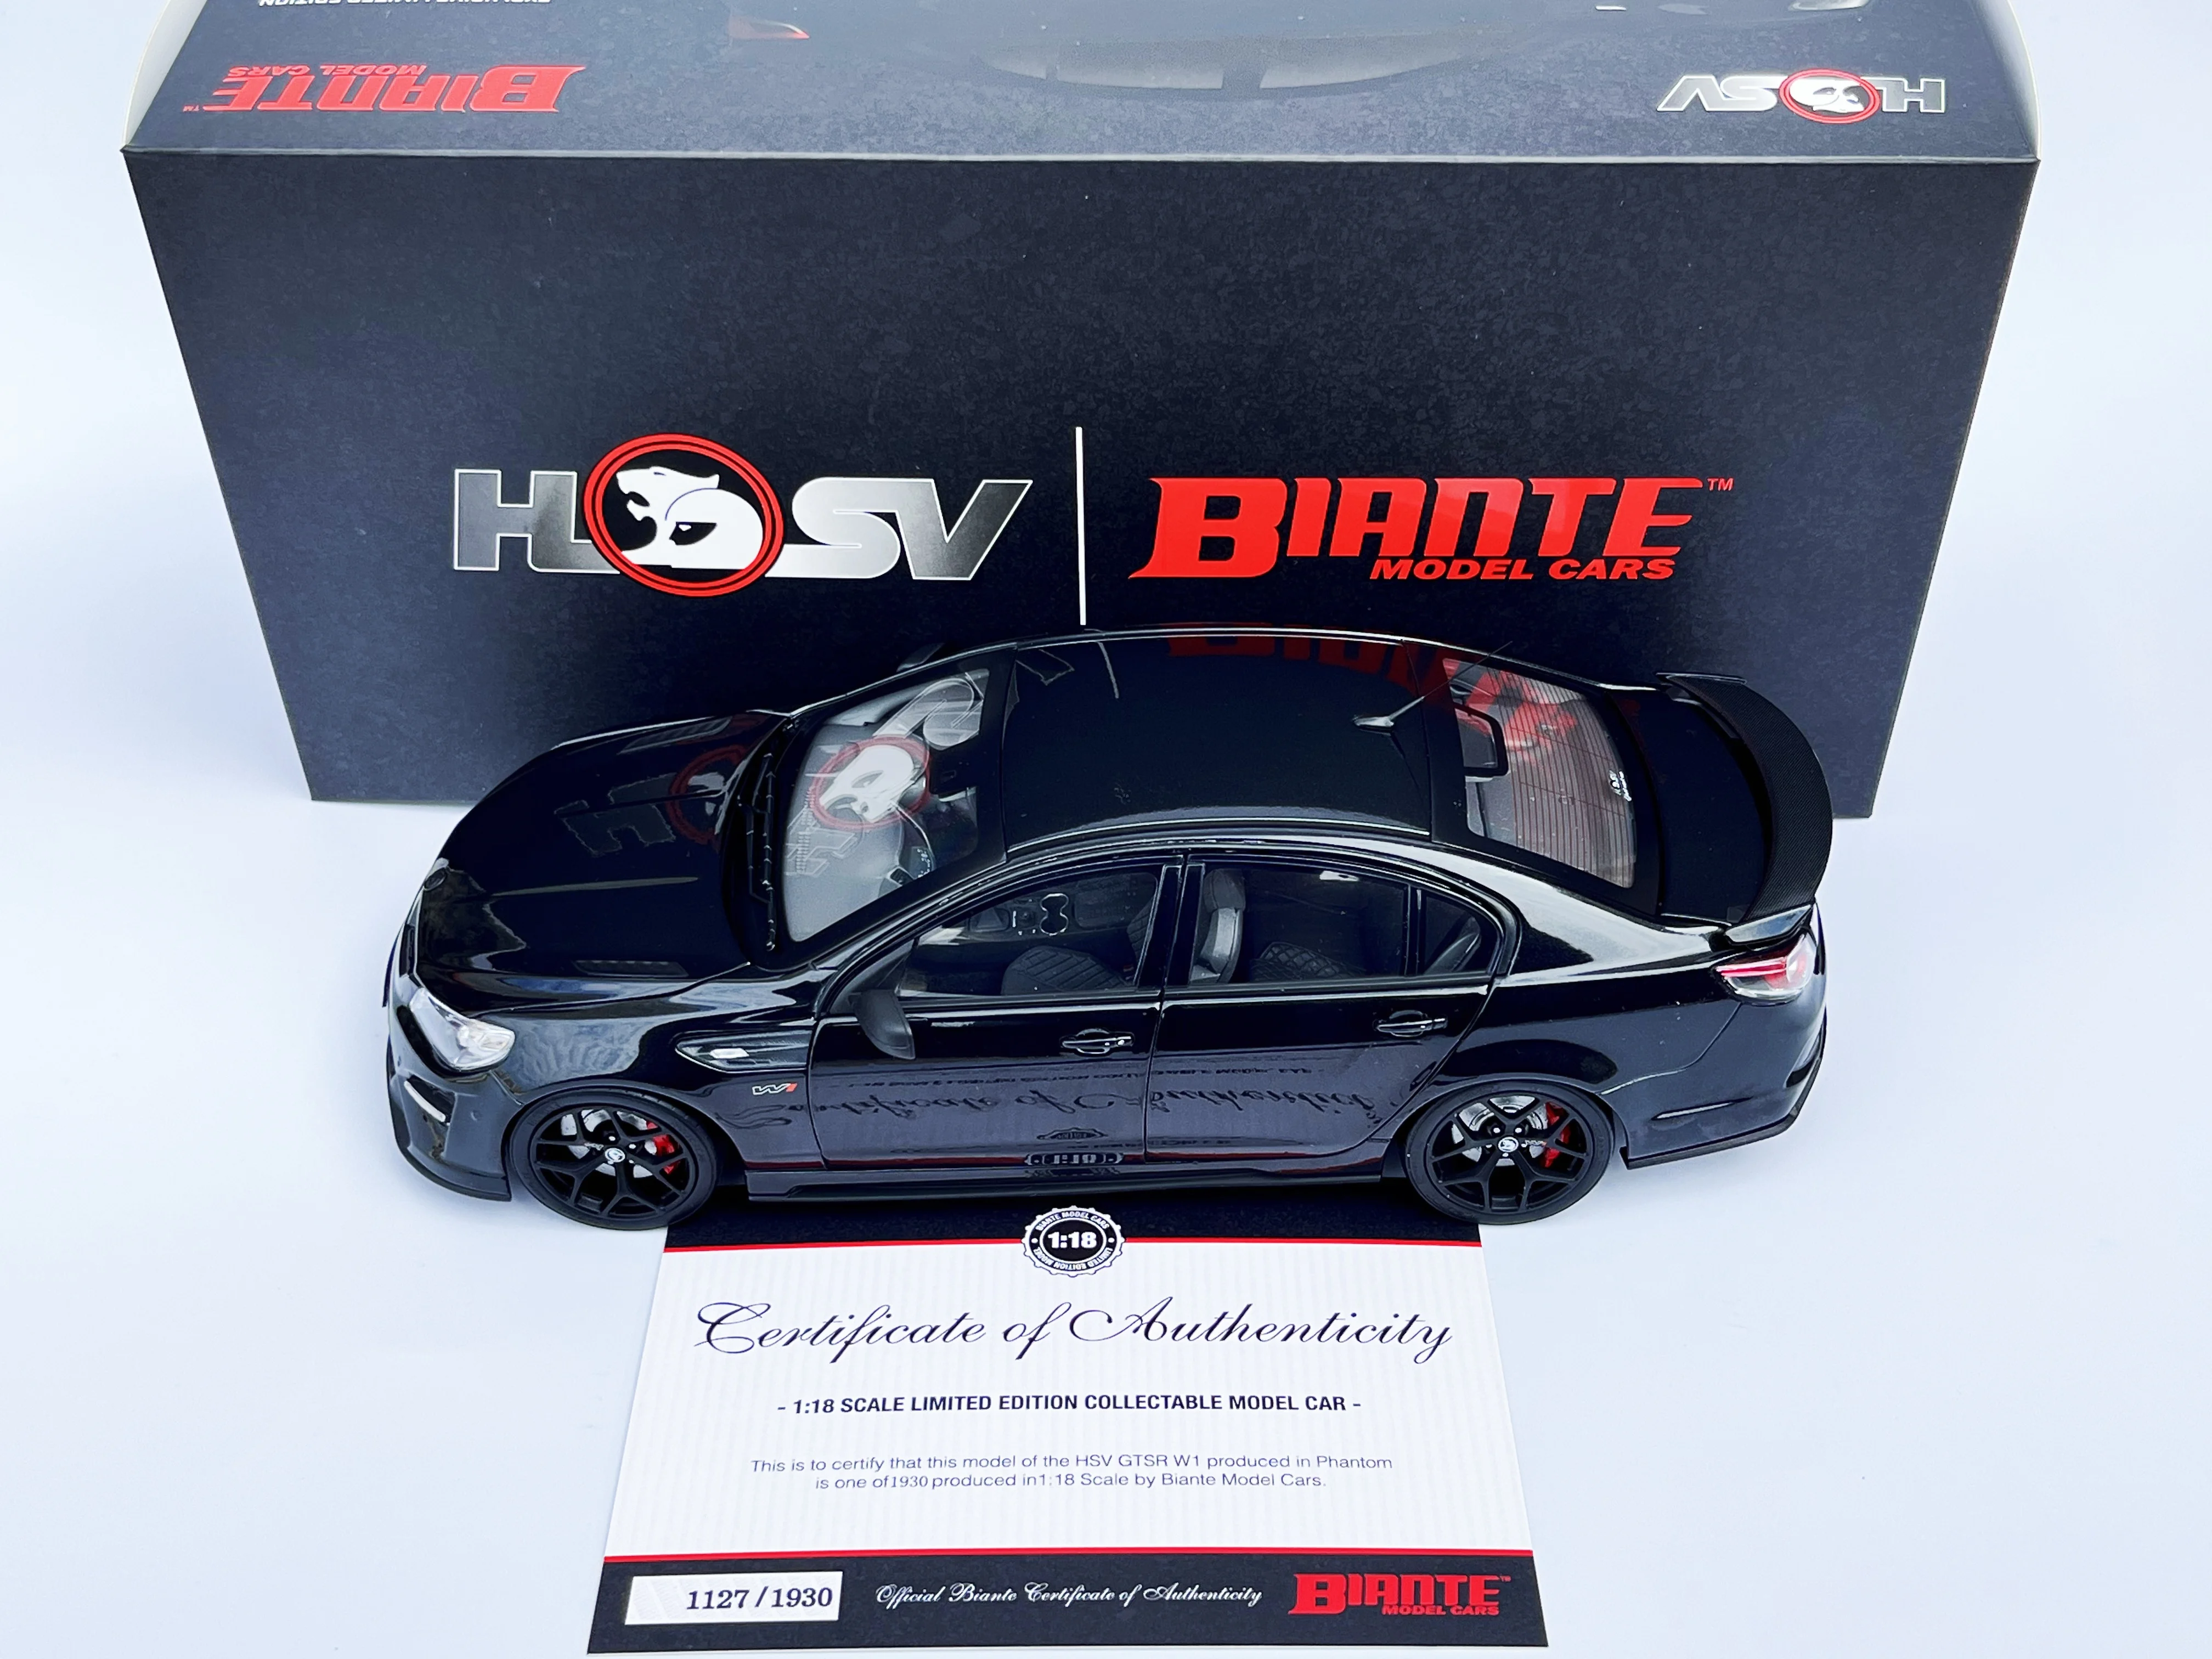 

Biante 1:18 Scale Diecast Alloy Holden HSV GT Cars Toys Model Classics Nostalgia Adult Collection Souvenir Gifts Static Display